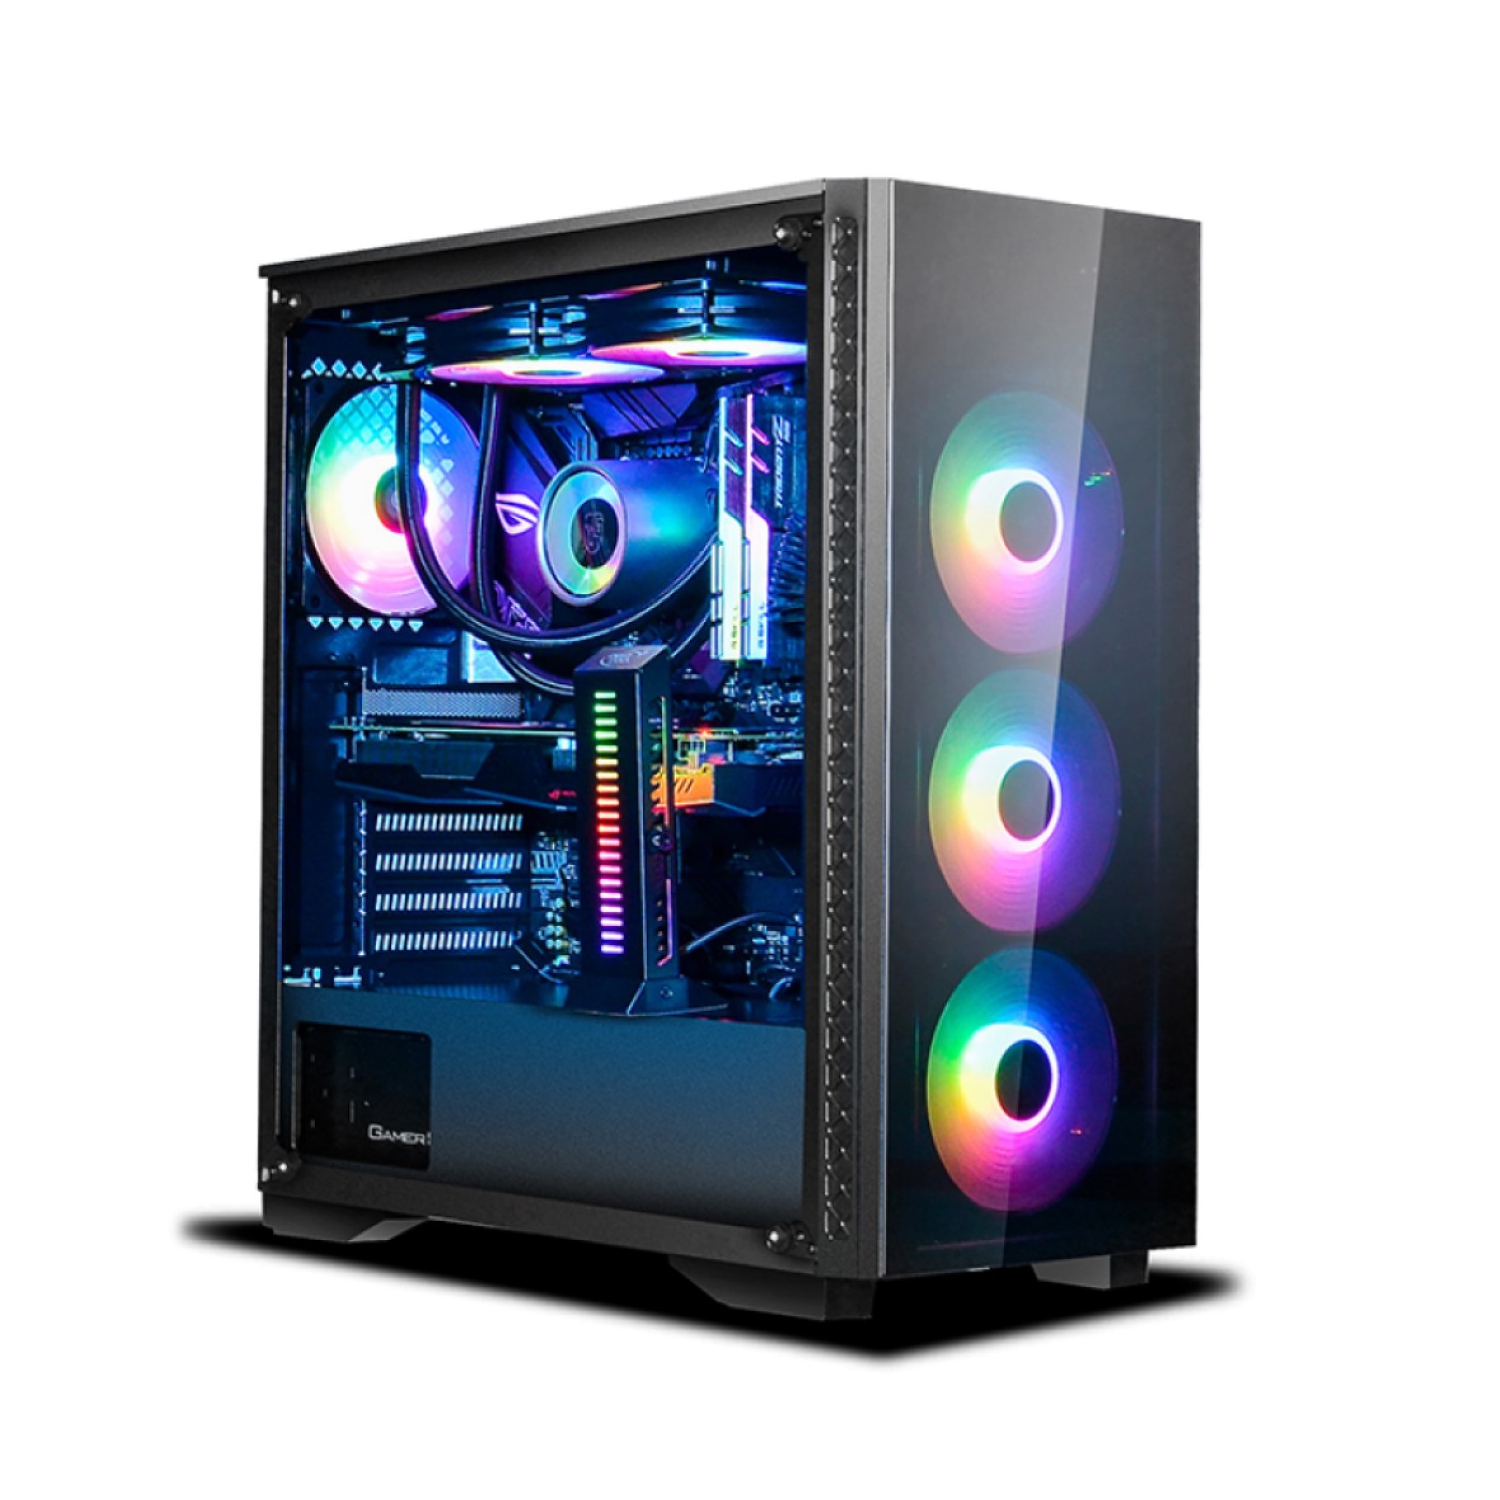 ZONIC Gaming PC | AMD Ryzen 5 5600G Processor 3.9GHz| 16 GB DDR4 RAM | 1TB M.2 SSD| GeForce RTX 3070 8GB GDDR6| Wi-Fi built-in| Windows 11- Gaming Keyboard Mouse and Headset Kit